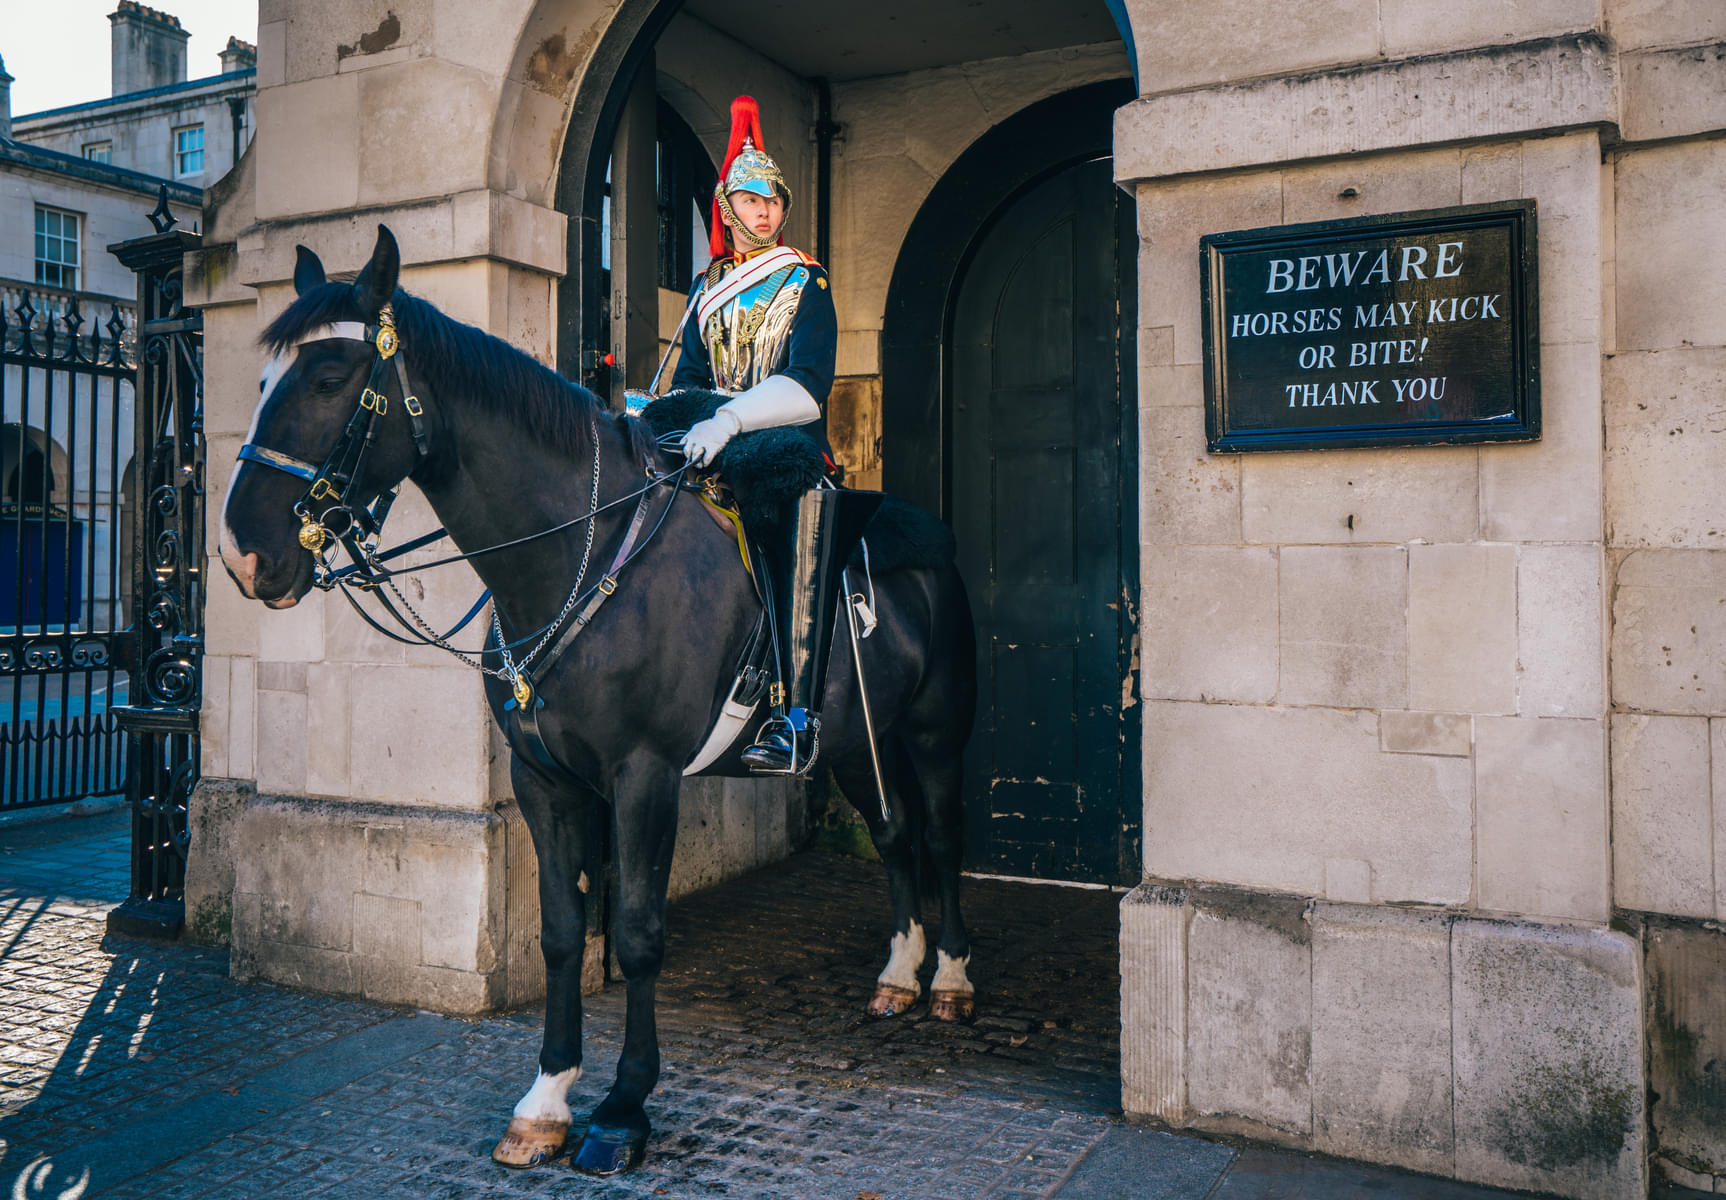 See soldiers and their horses in action at The Household Cavalry Museum